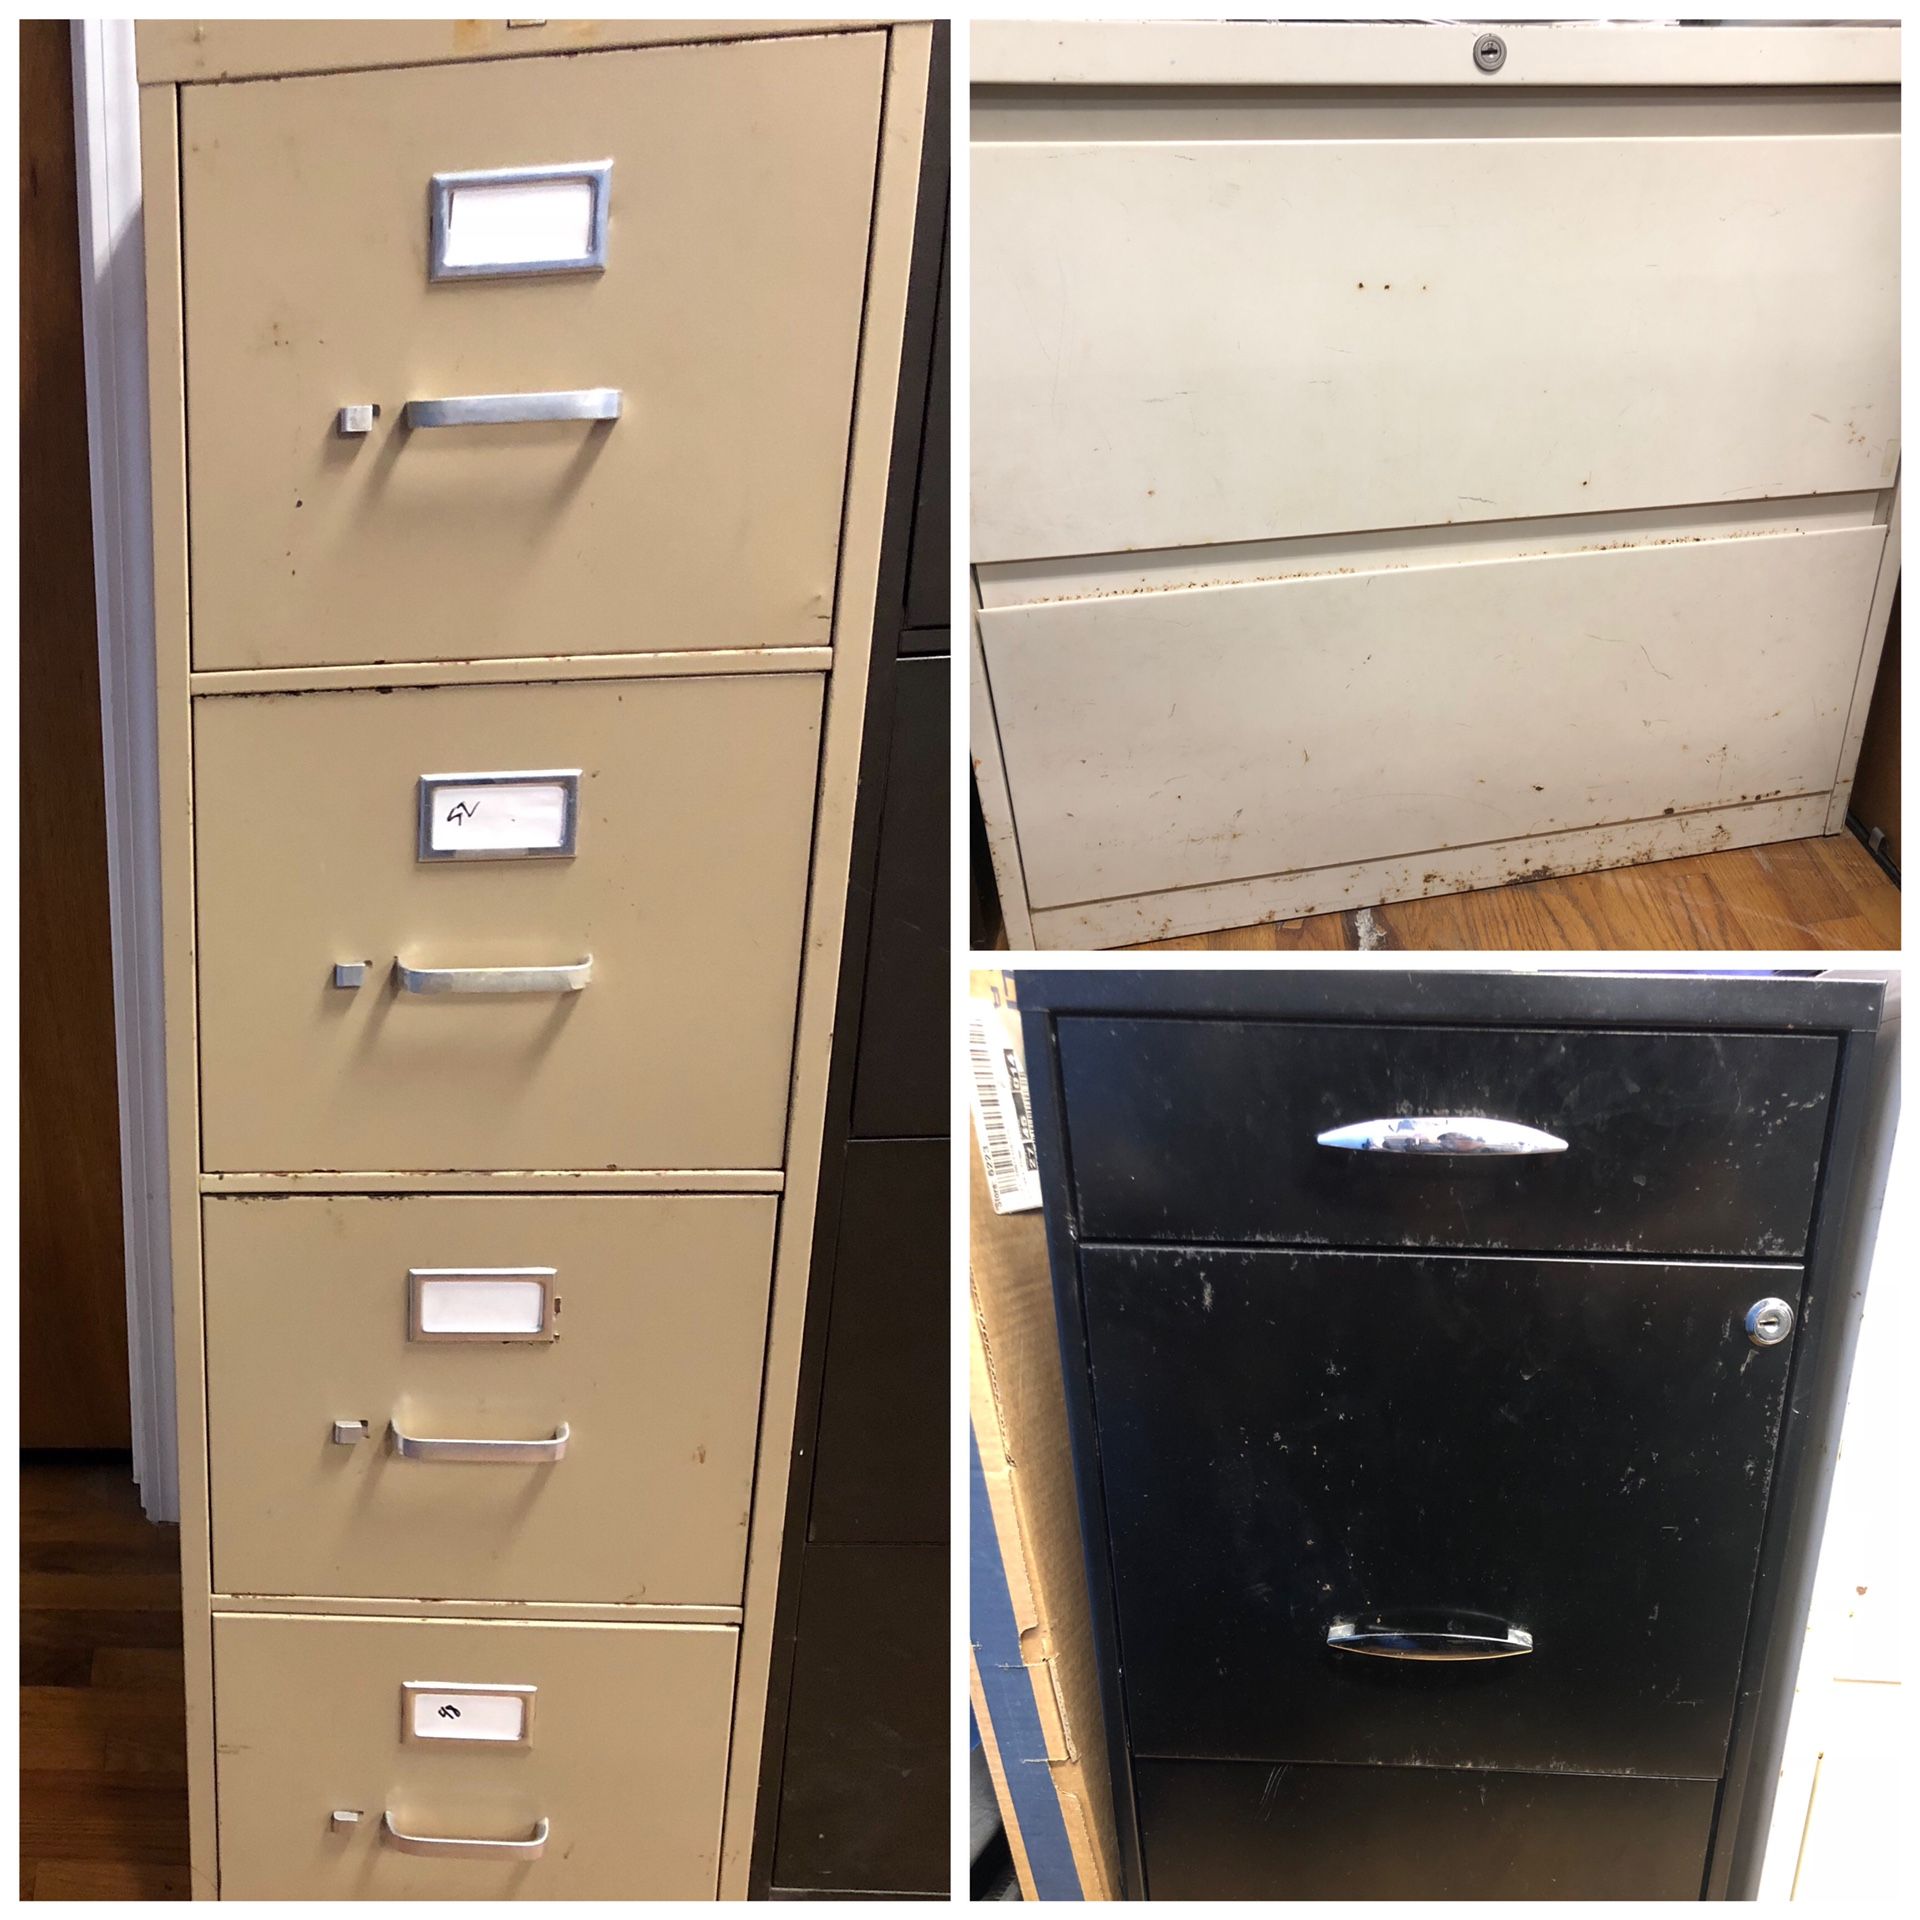 3 Metal file cabinets